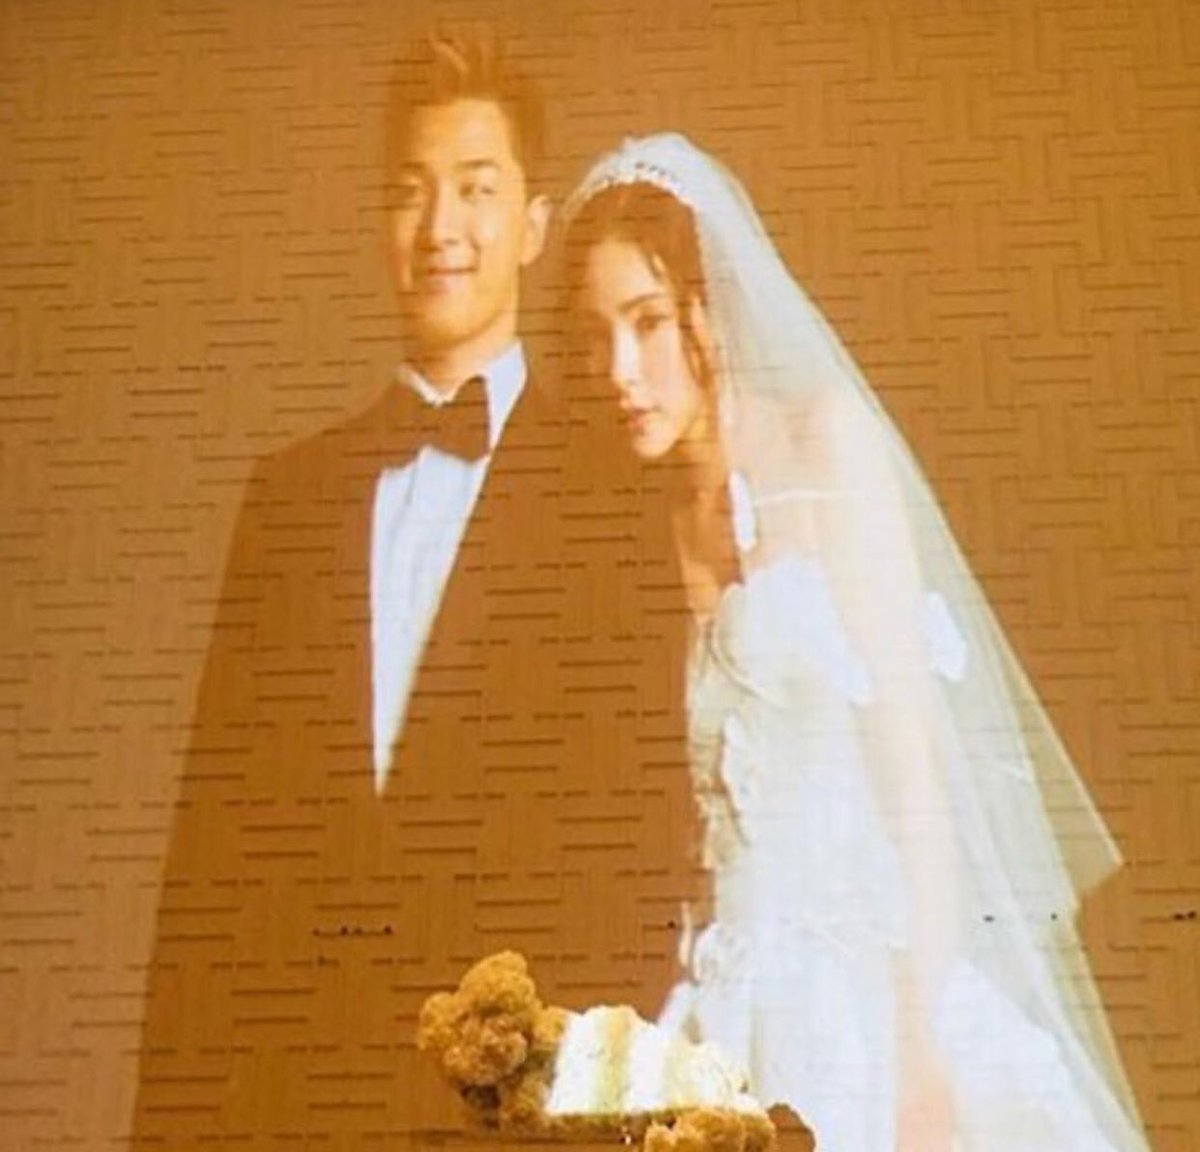 Omg their wedding photo But youngbe where are you looking at Via crystal880818